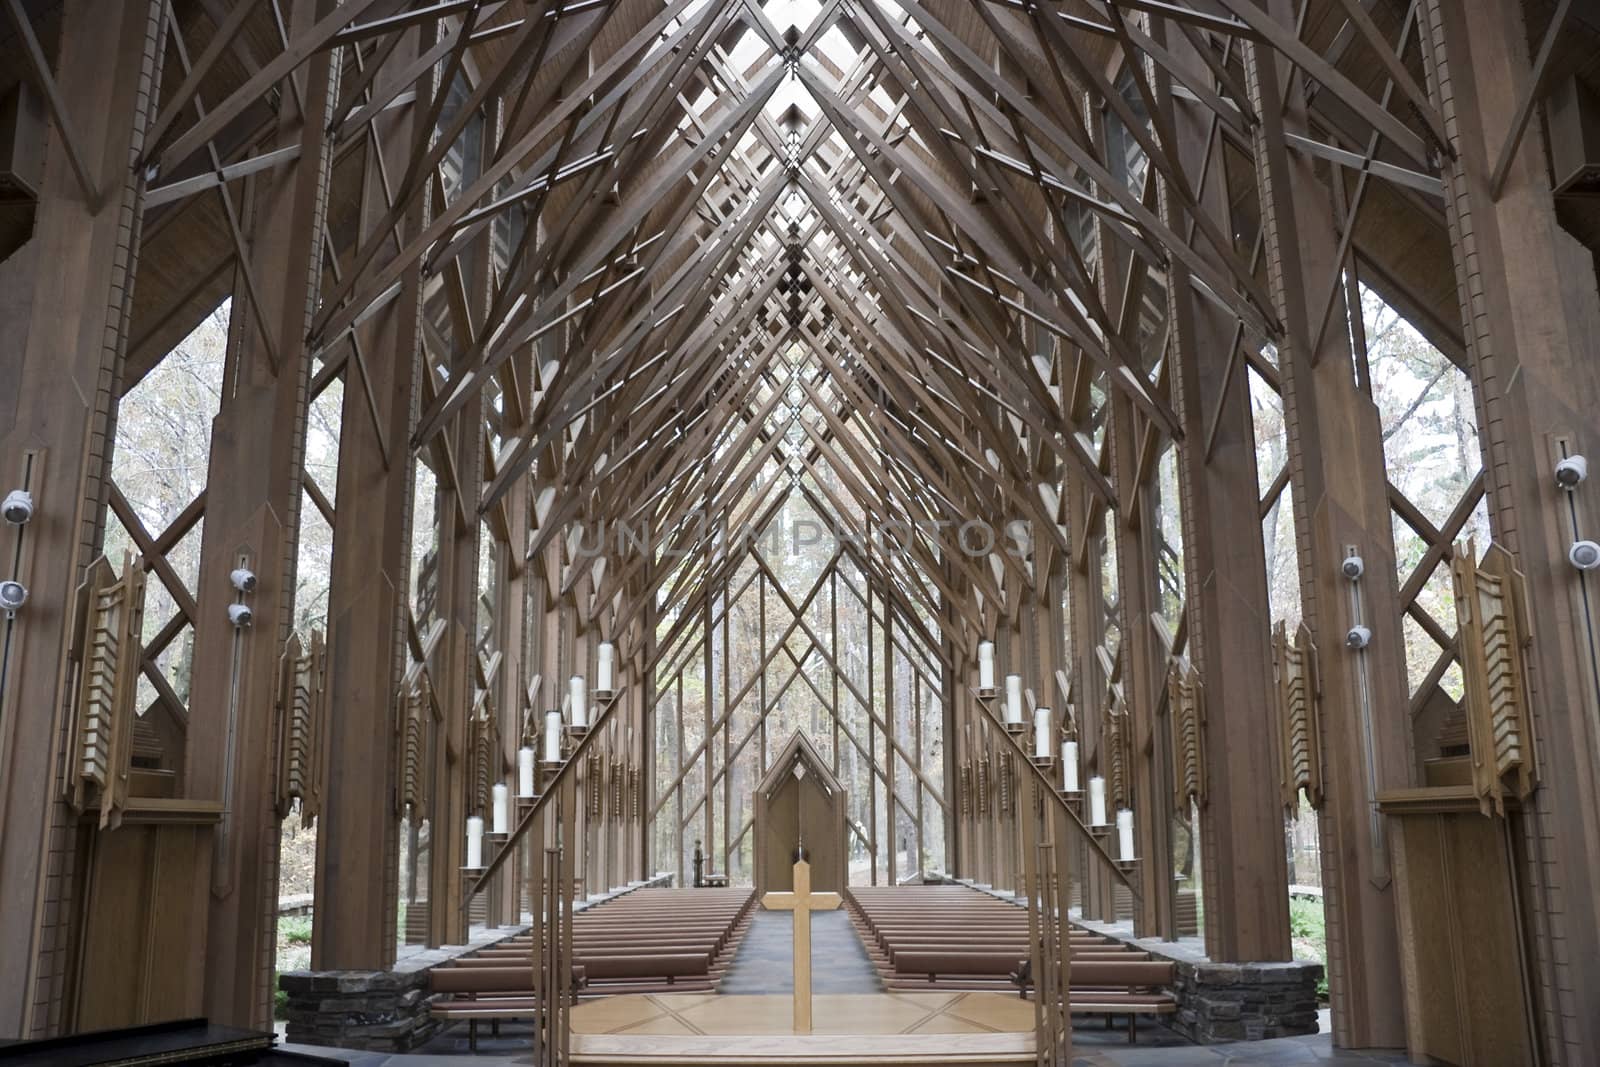 The insides of a wooden and glass church from the alter